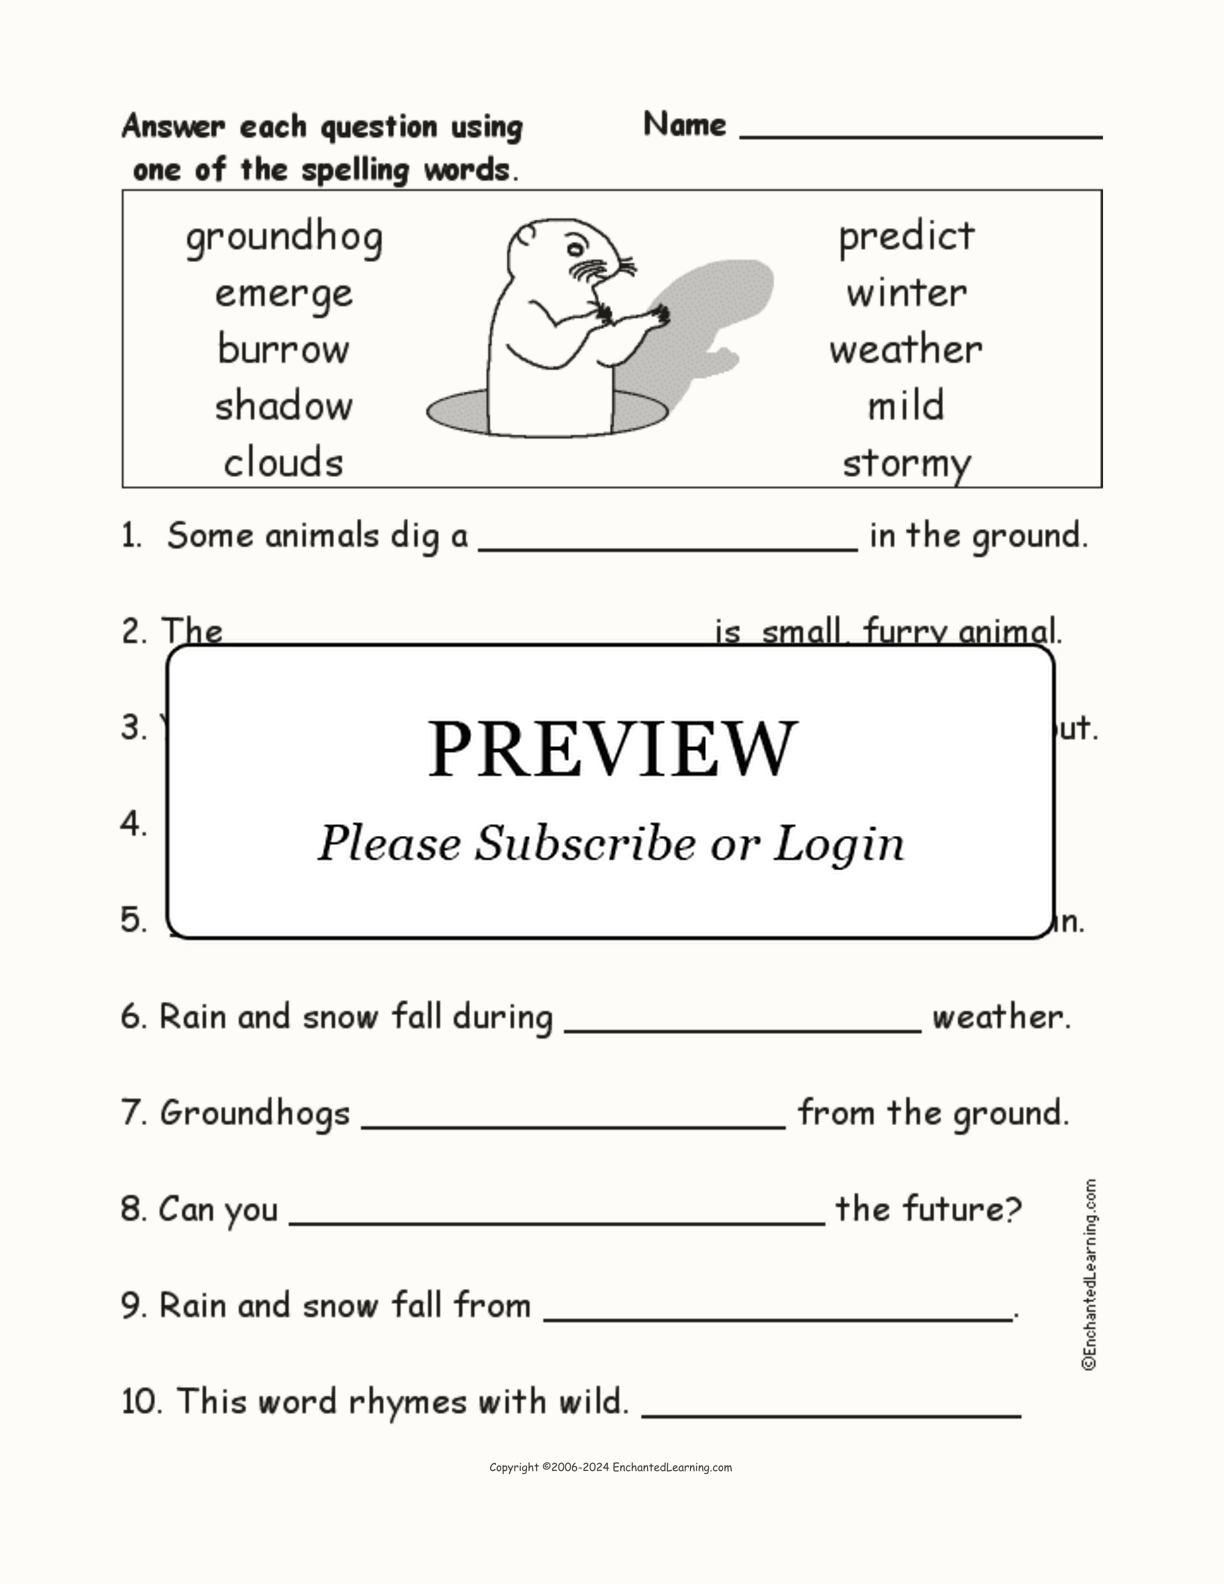 Groundhog Day Spelling Word Questions interactive worksheet page 1